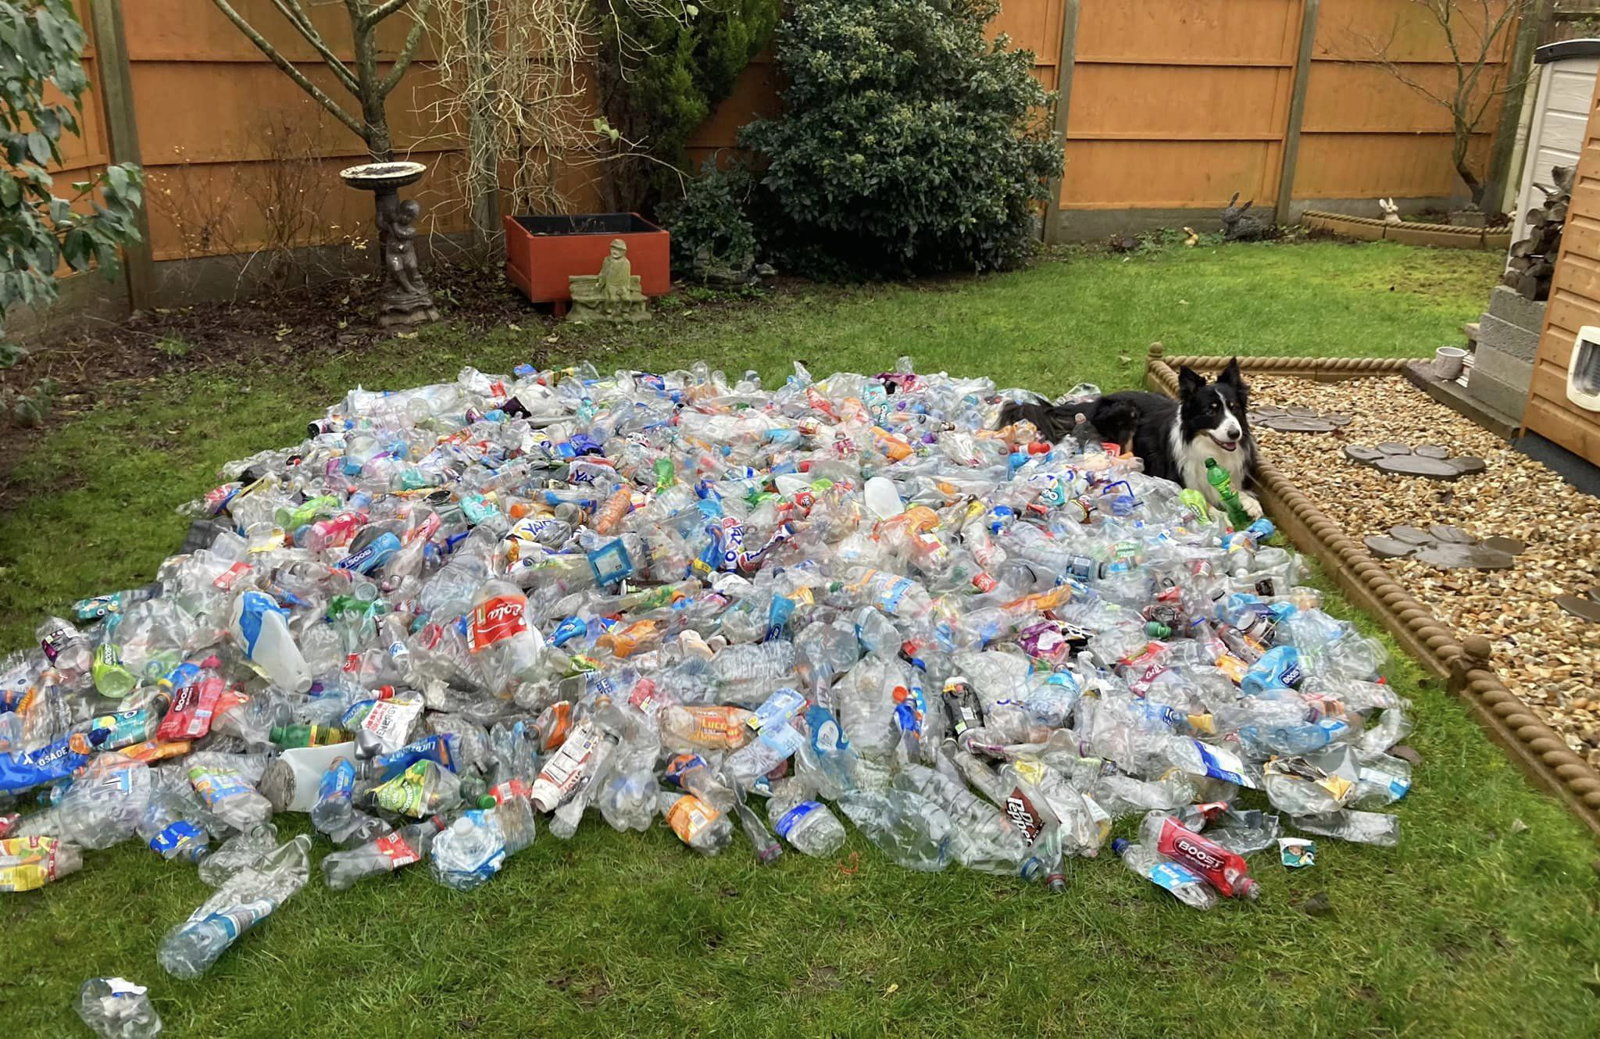 A pile of 1,334 bottles in a backyard with Scruffy laying on top of them, off to the side, a single bottle under his paw.